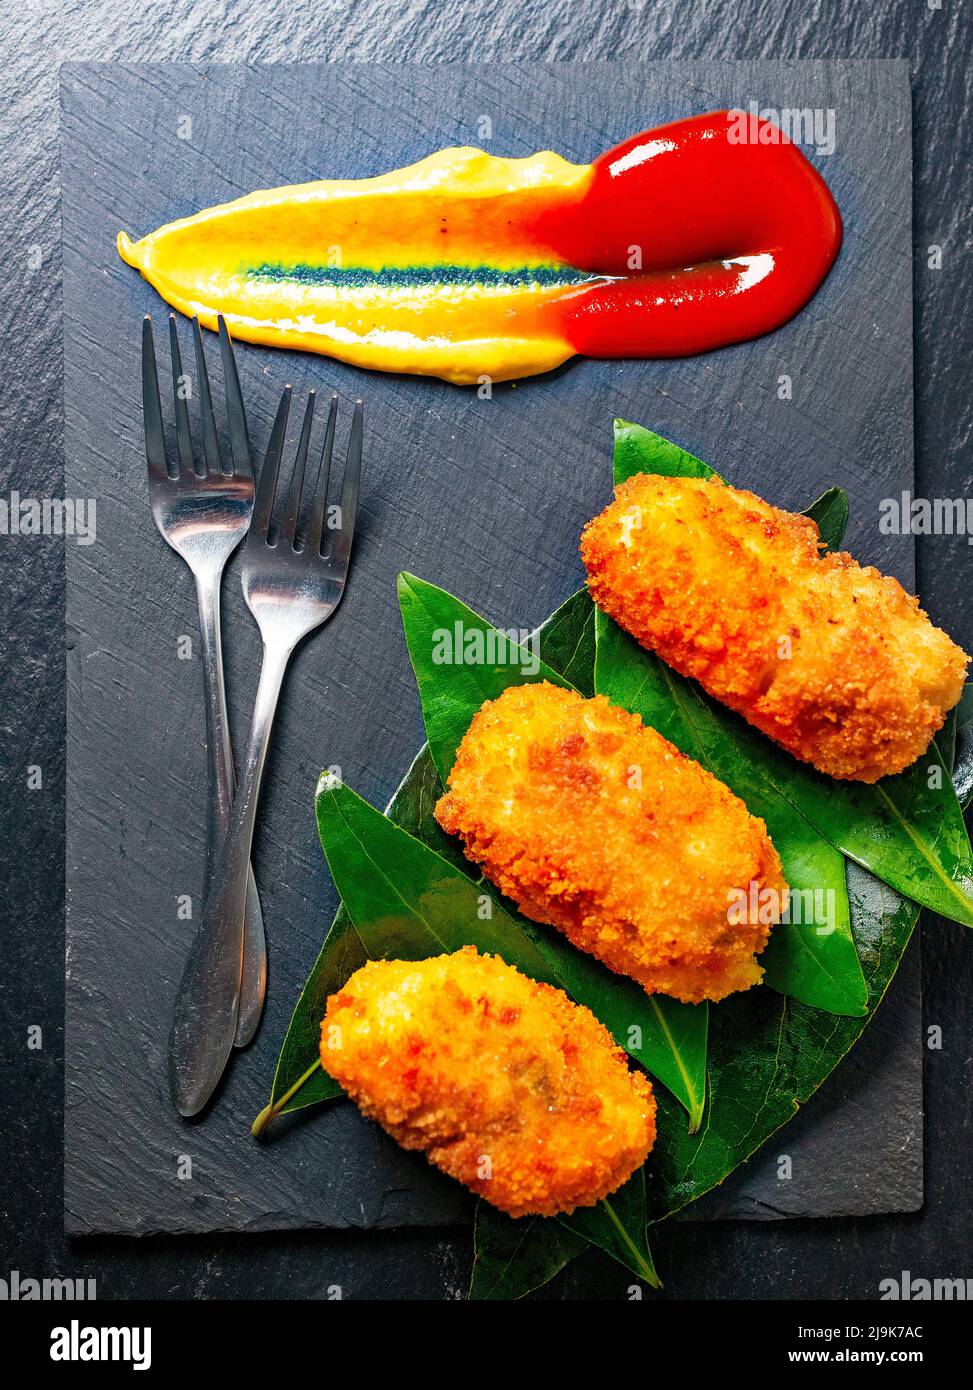 A view of an appetizer plate of croquettes served in a gourmet style Stock Photo